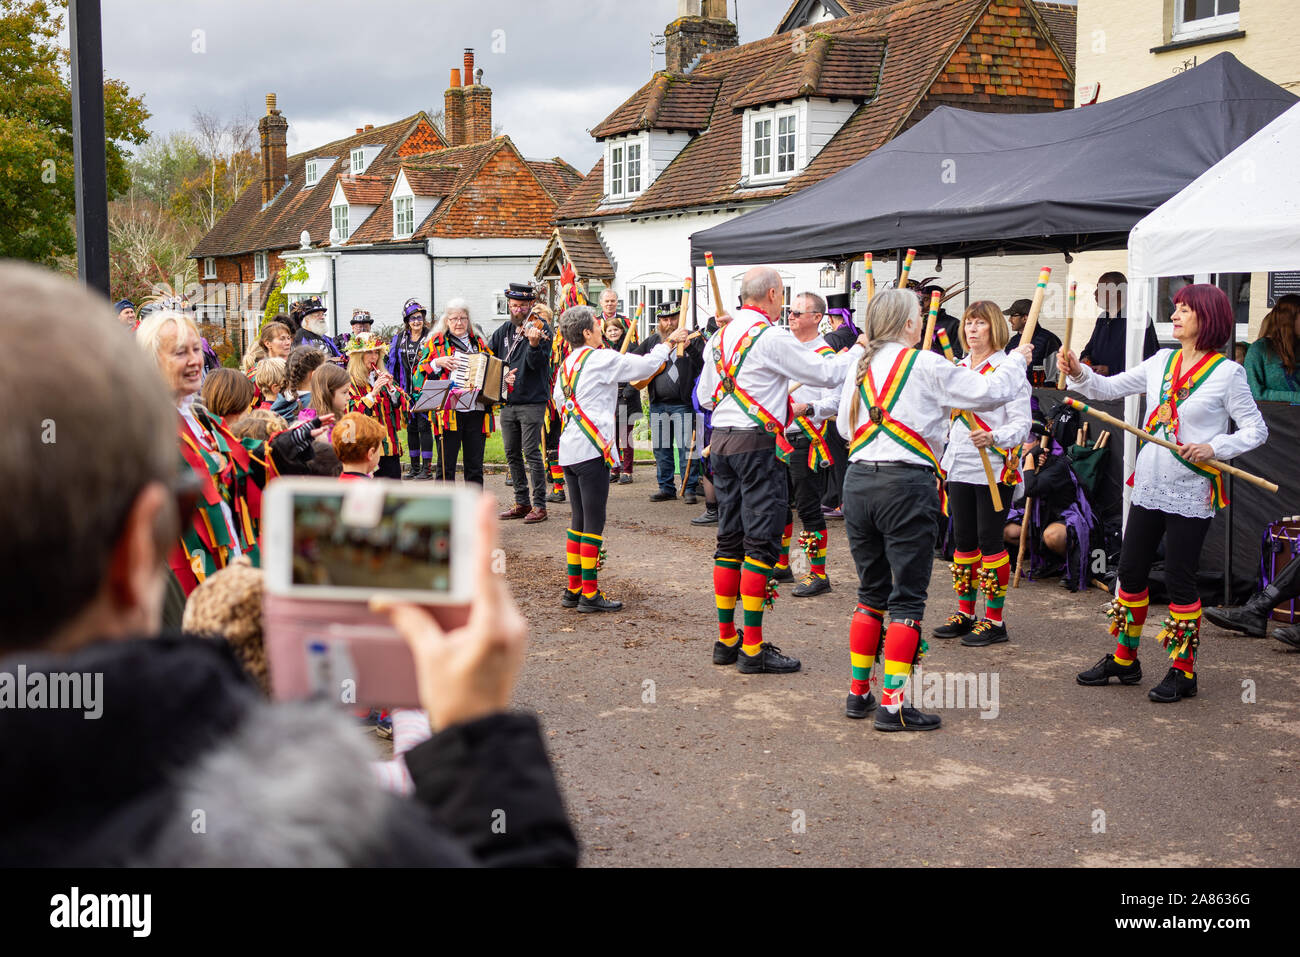 Traditional Morris dancing in Brockham in England UK. The burning of the sticks represents the end of the dancing season where the sticks are thrown i Stock Photo